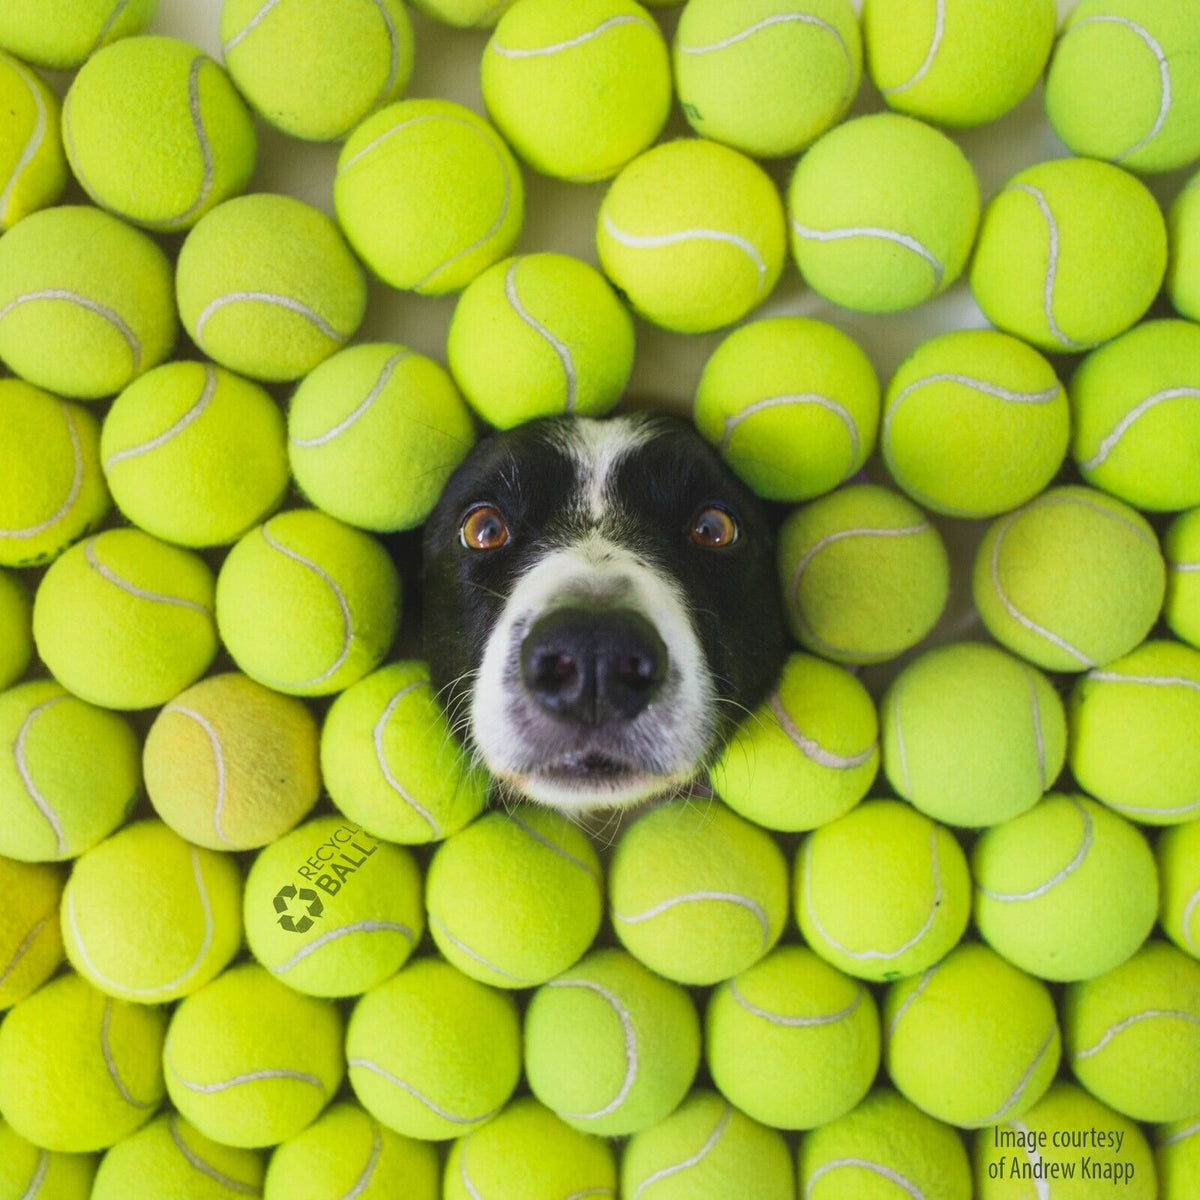 WOW 41 INDOOR USED TENNIS BALLS-GIFT FOR YOUR DOG DOGS LUV THEM 